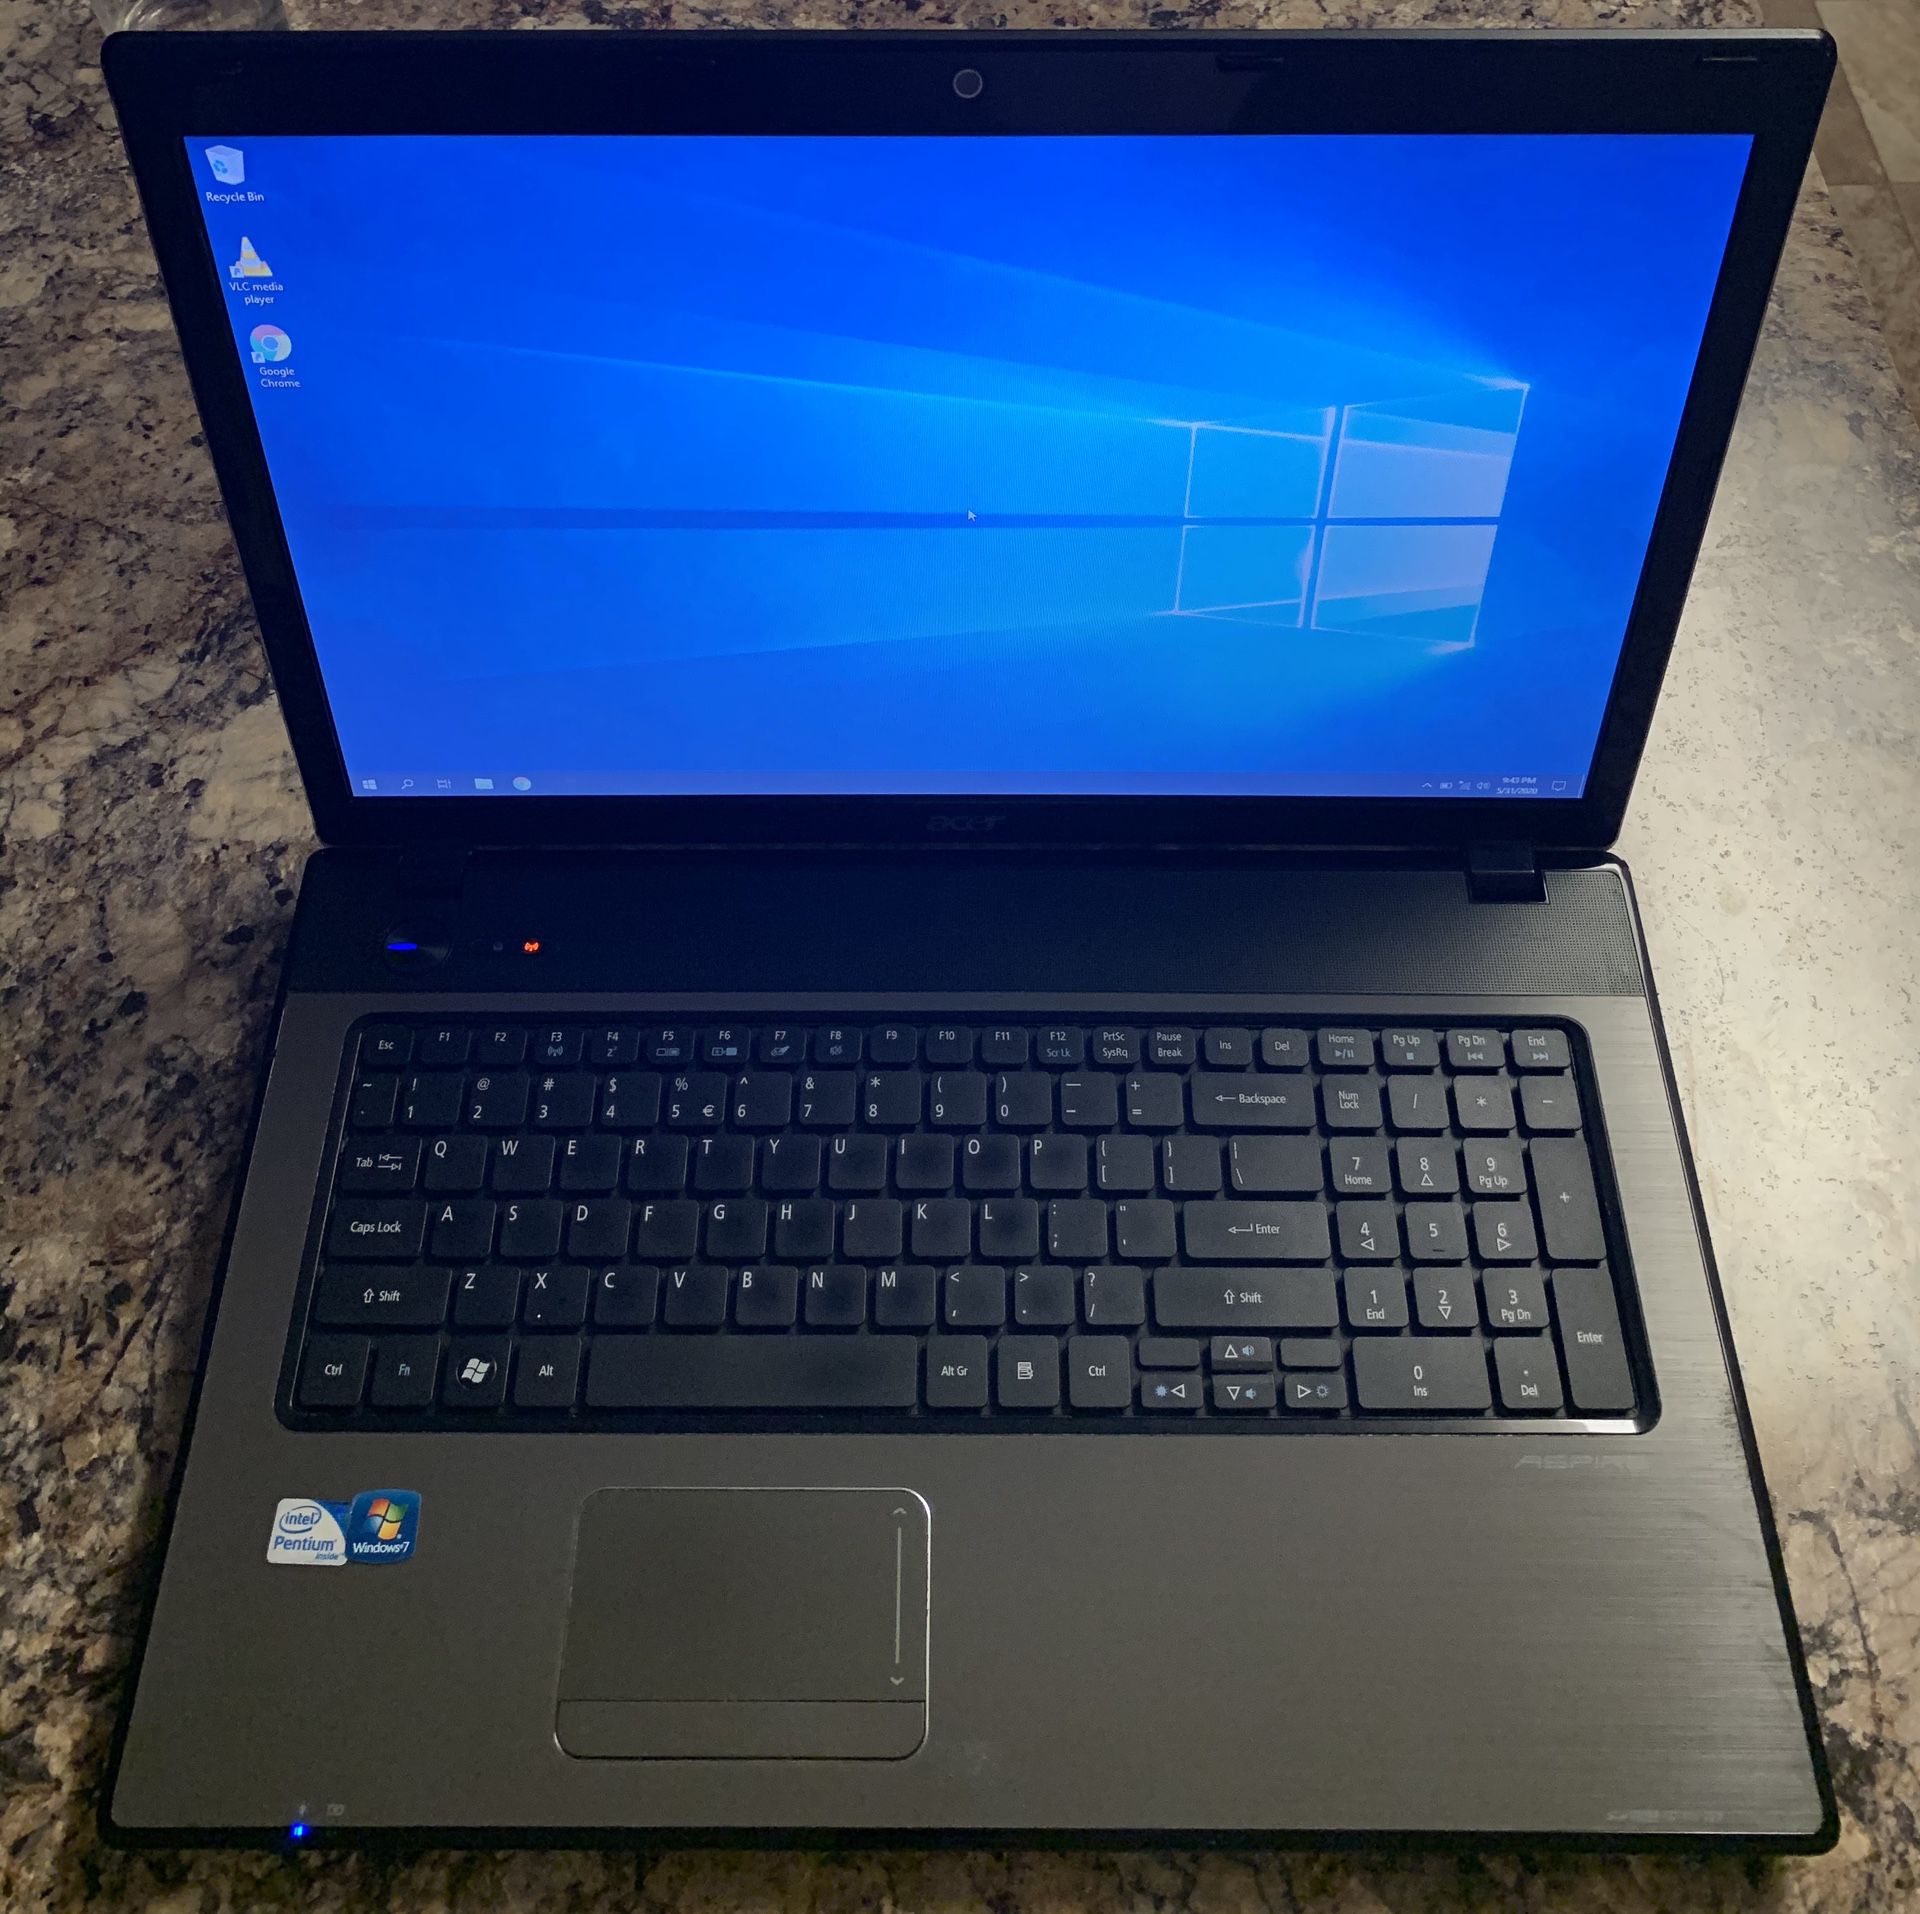 $149 - ACER Laptop - Large Screen - Windows 10 - Brand New Battery - Works Great - FREE DELIVERY